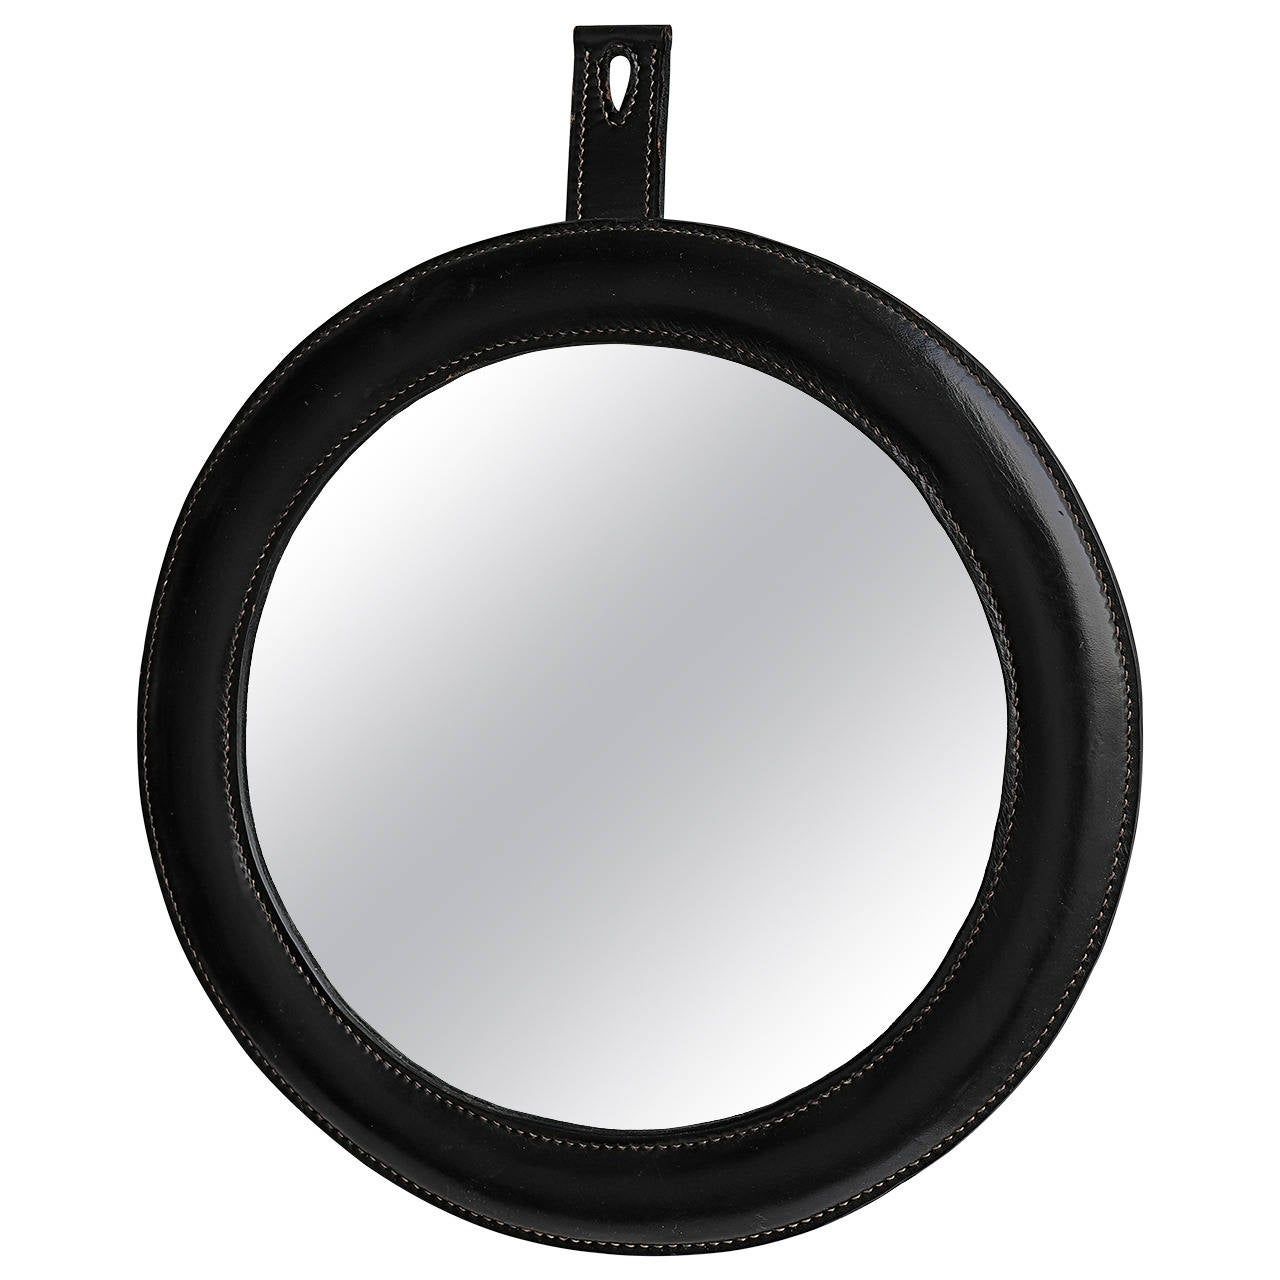 Hand Stitched Black Leather Wall Mirror In Style Of Jacques Adnet For With Regard To Black Leather Strap Wall Mirrors (View 12 of 15)